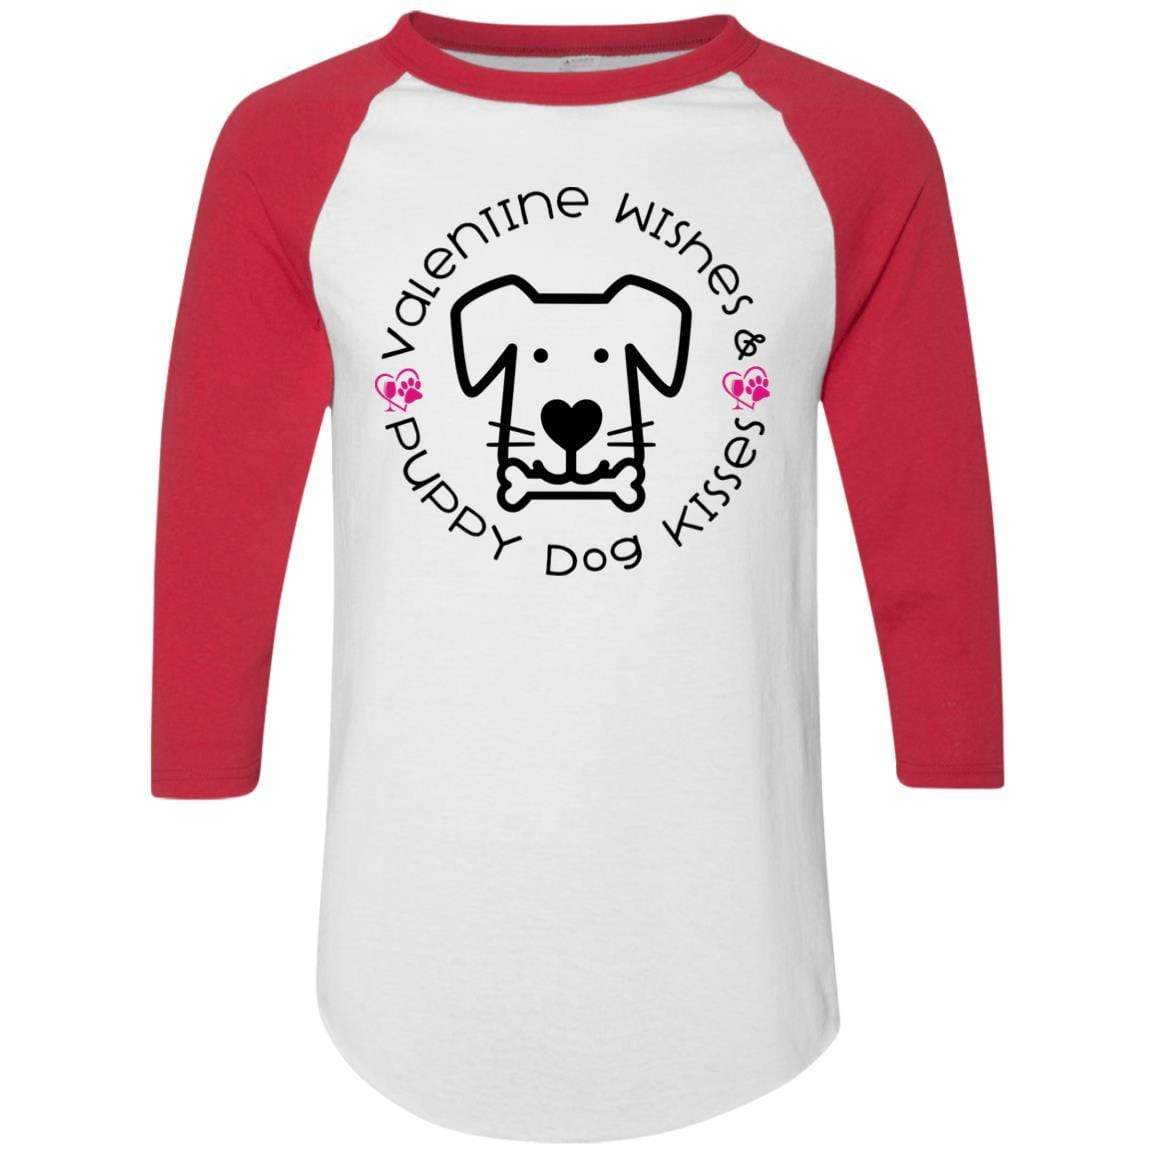 T-Shirts White/Red / S Winey Bitches Co 'Valentine Wishes and Puppy Dog Kisses" (Dog) Colorblock Raglan Jersey WineyBitchesCo